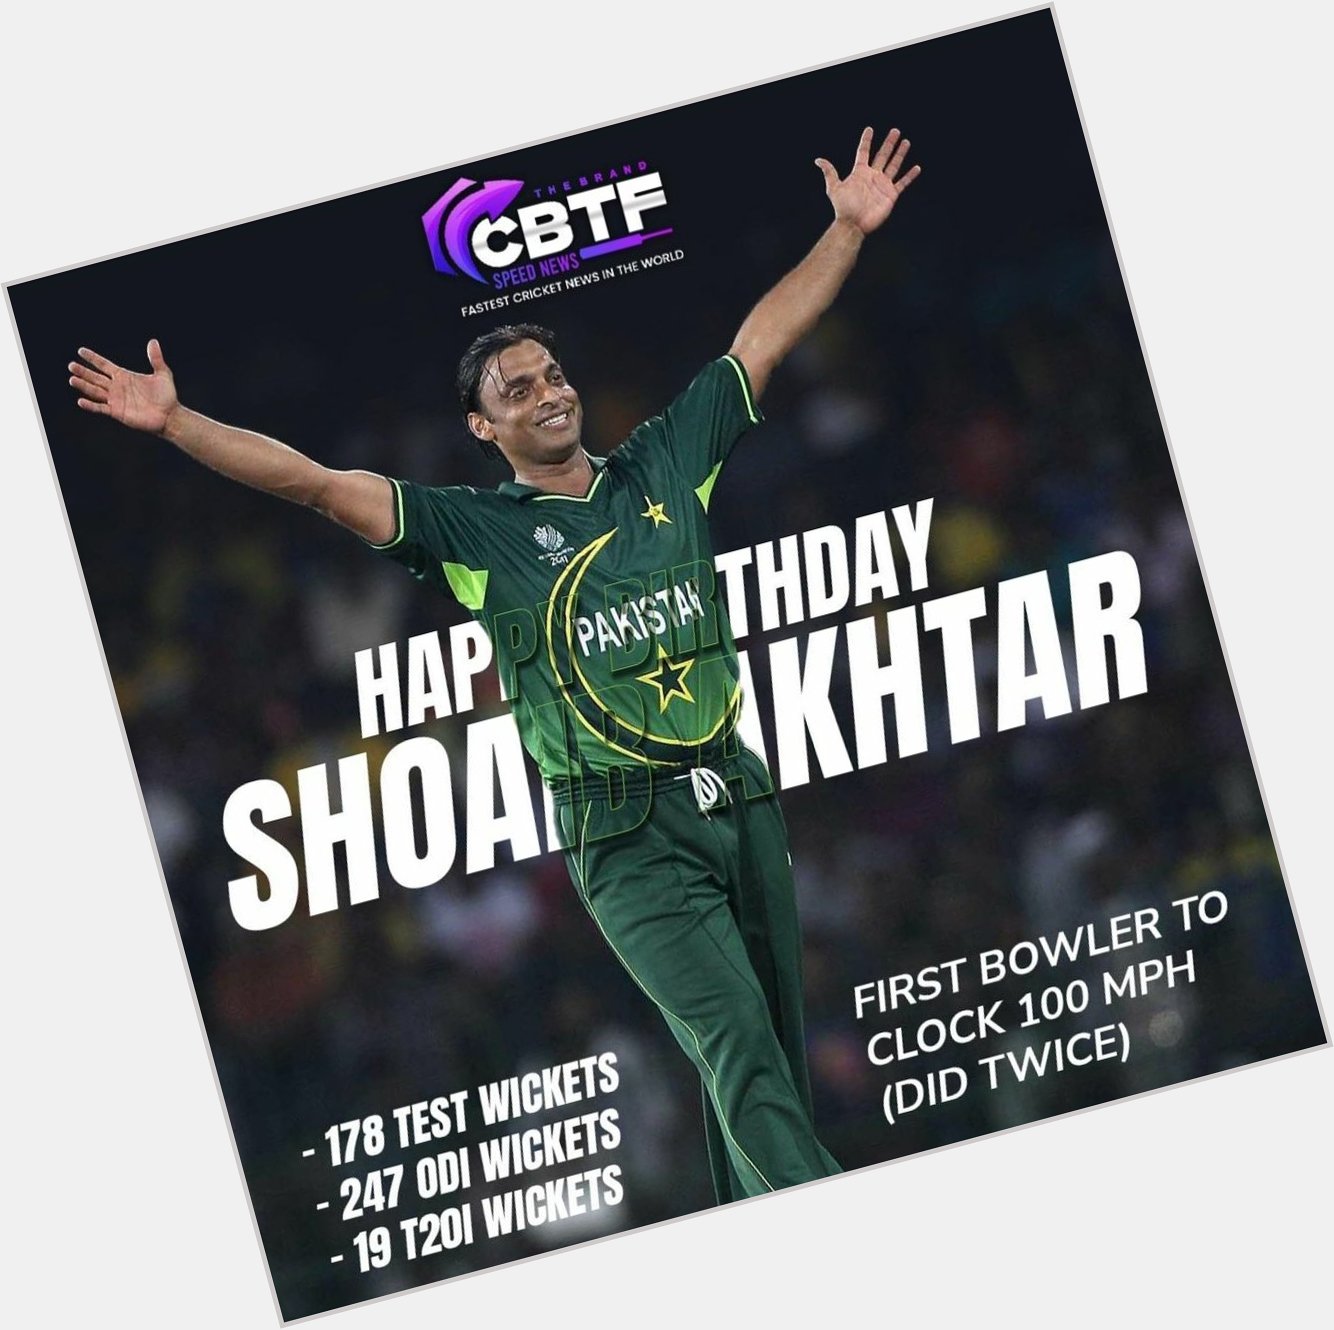 Happy birthday to the fastest bowler in cricket, Shoaib Akhtar. 